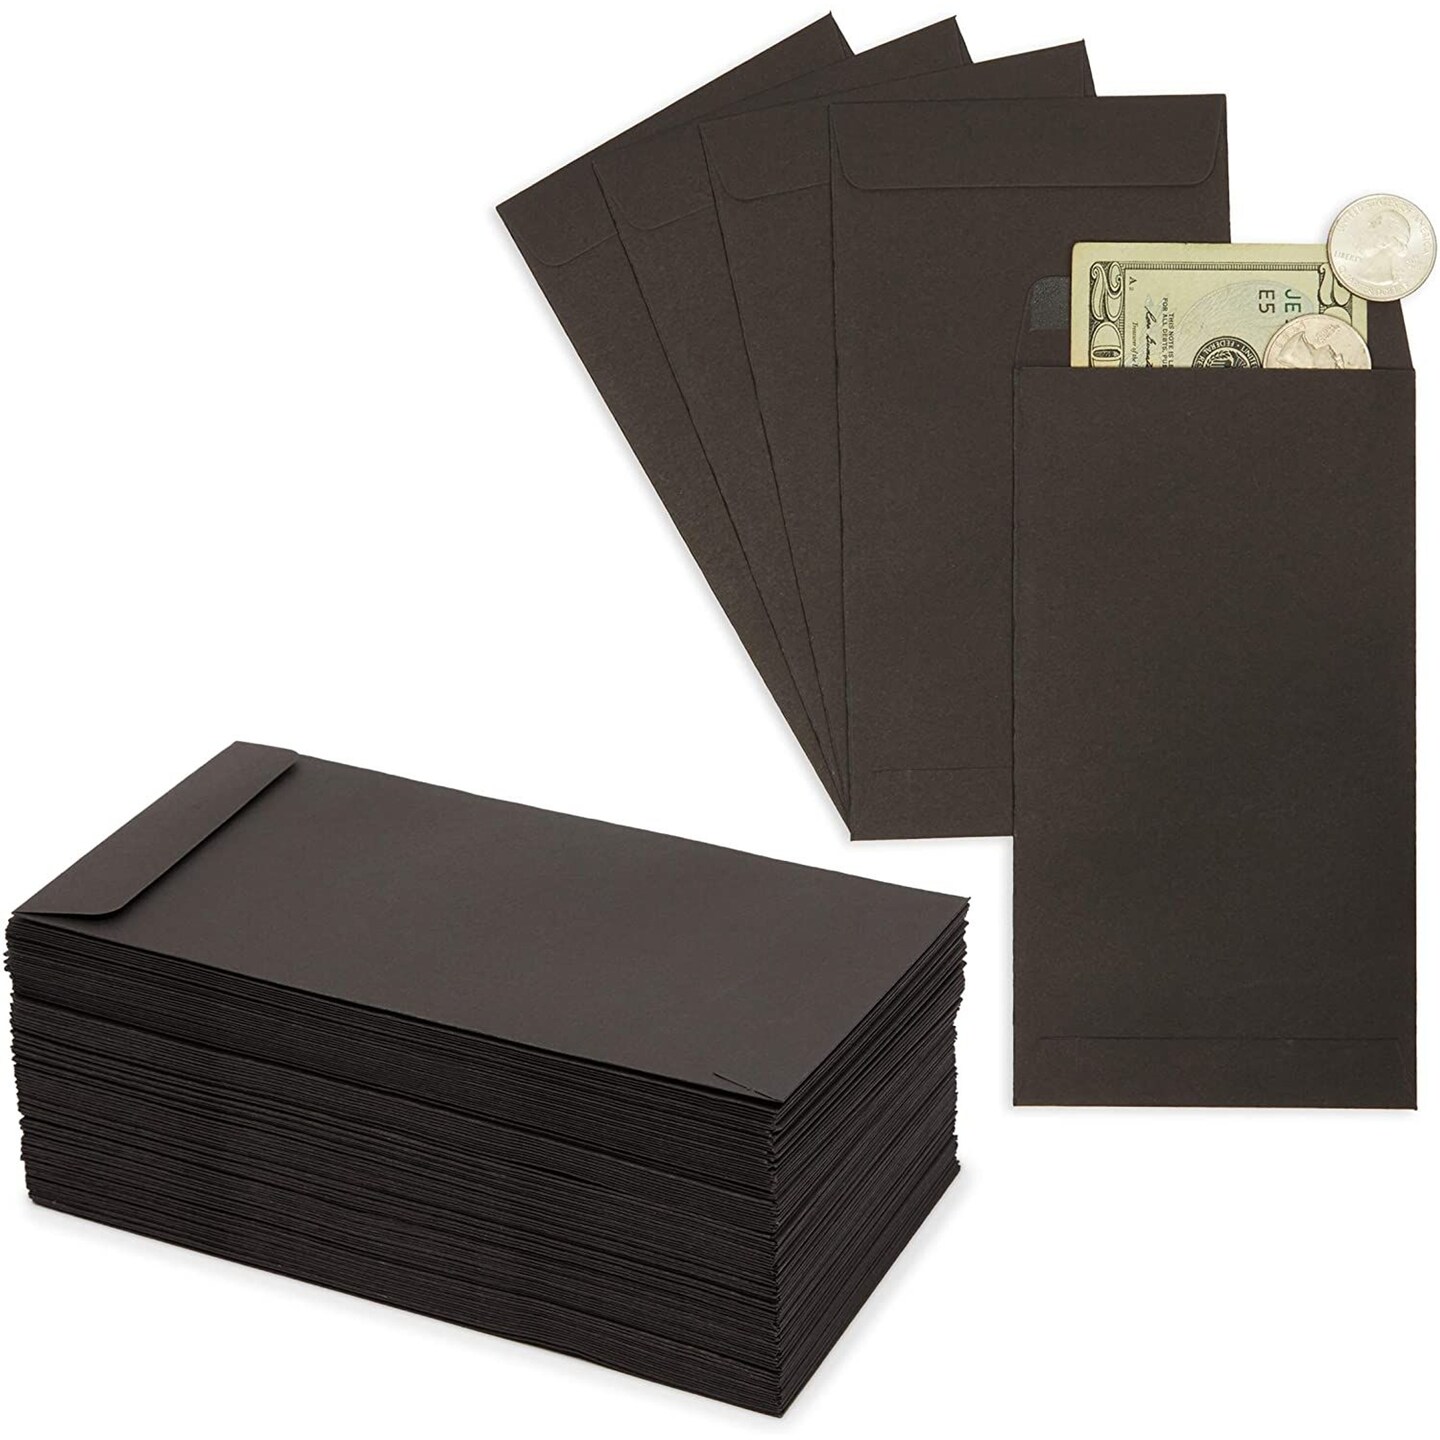 Heavyweight 8.5 x 11 Cardstock Paper by Recollections™, 100